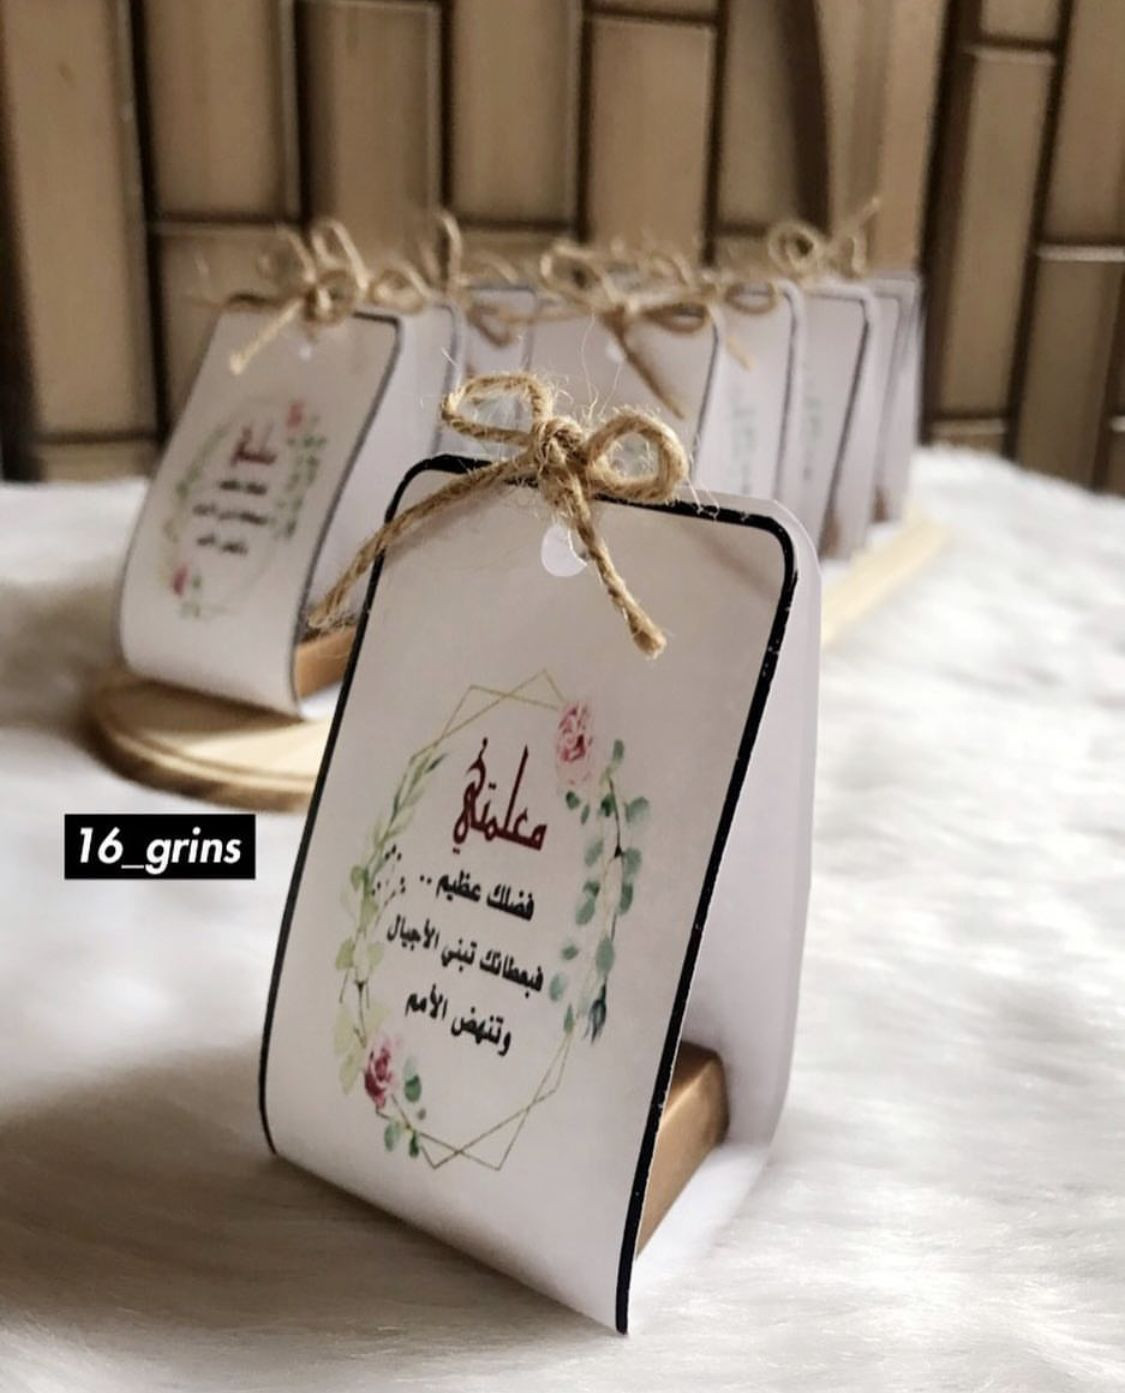 Cute Gift Wrapping Ideas For Boyfriend
 Pin by bnt almalki on Gift ideas in 2020